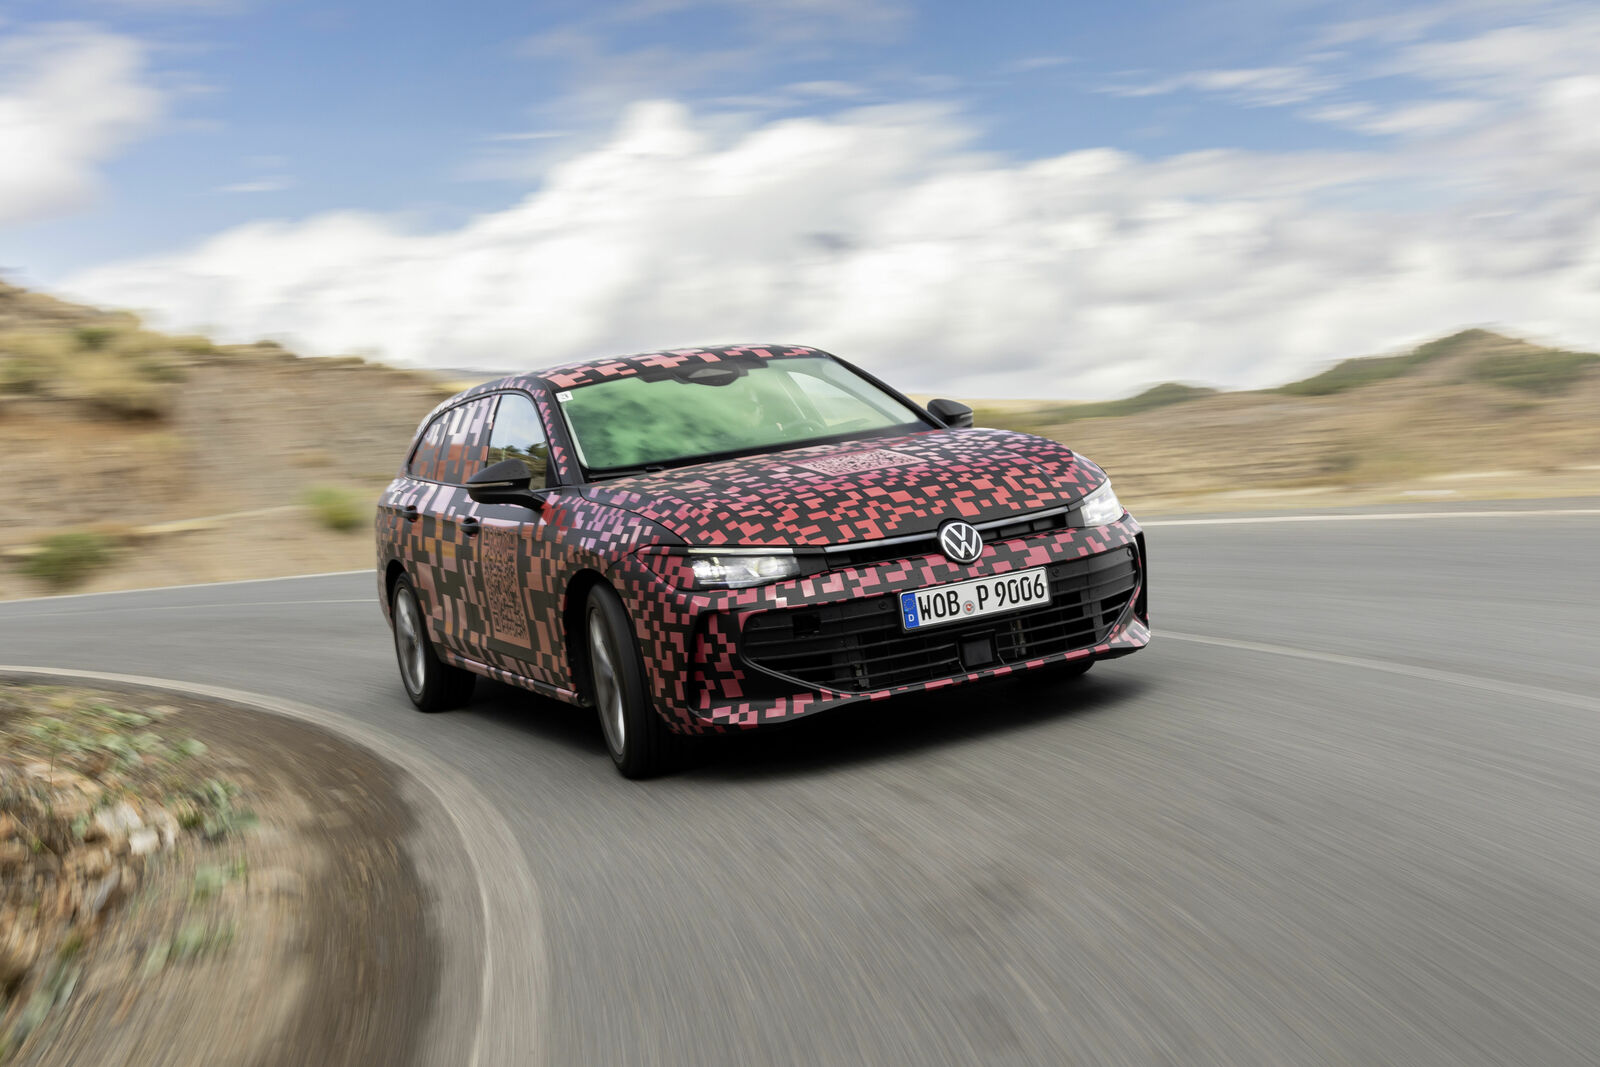 The all-new Passat Variant on final test drives